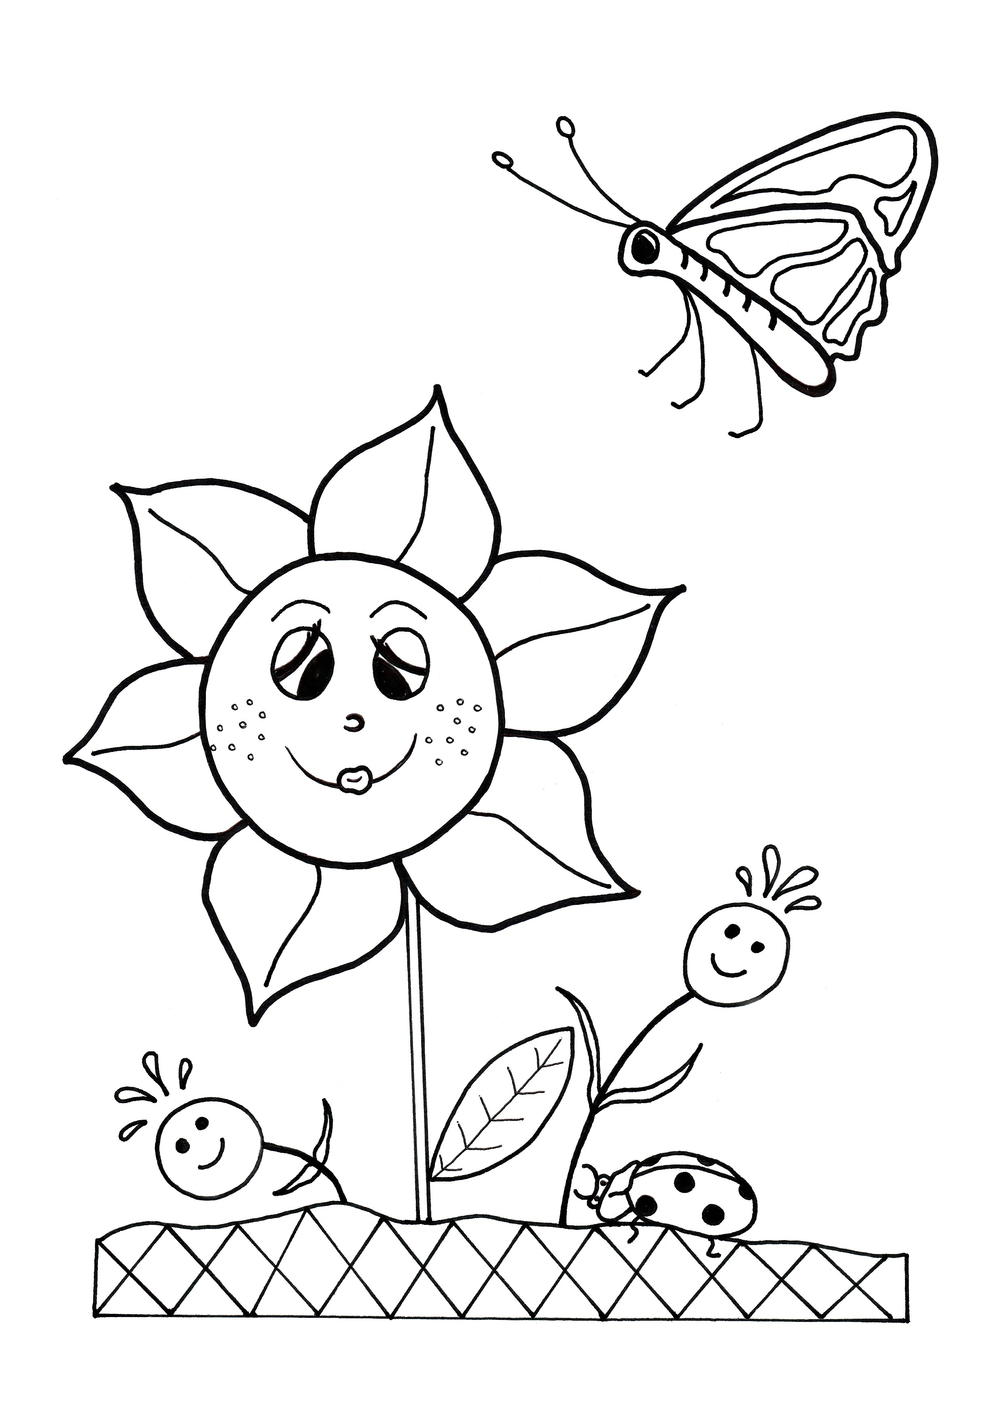 flowers-coloring-pages-10-free-fun-printable-coloring-pages-of